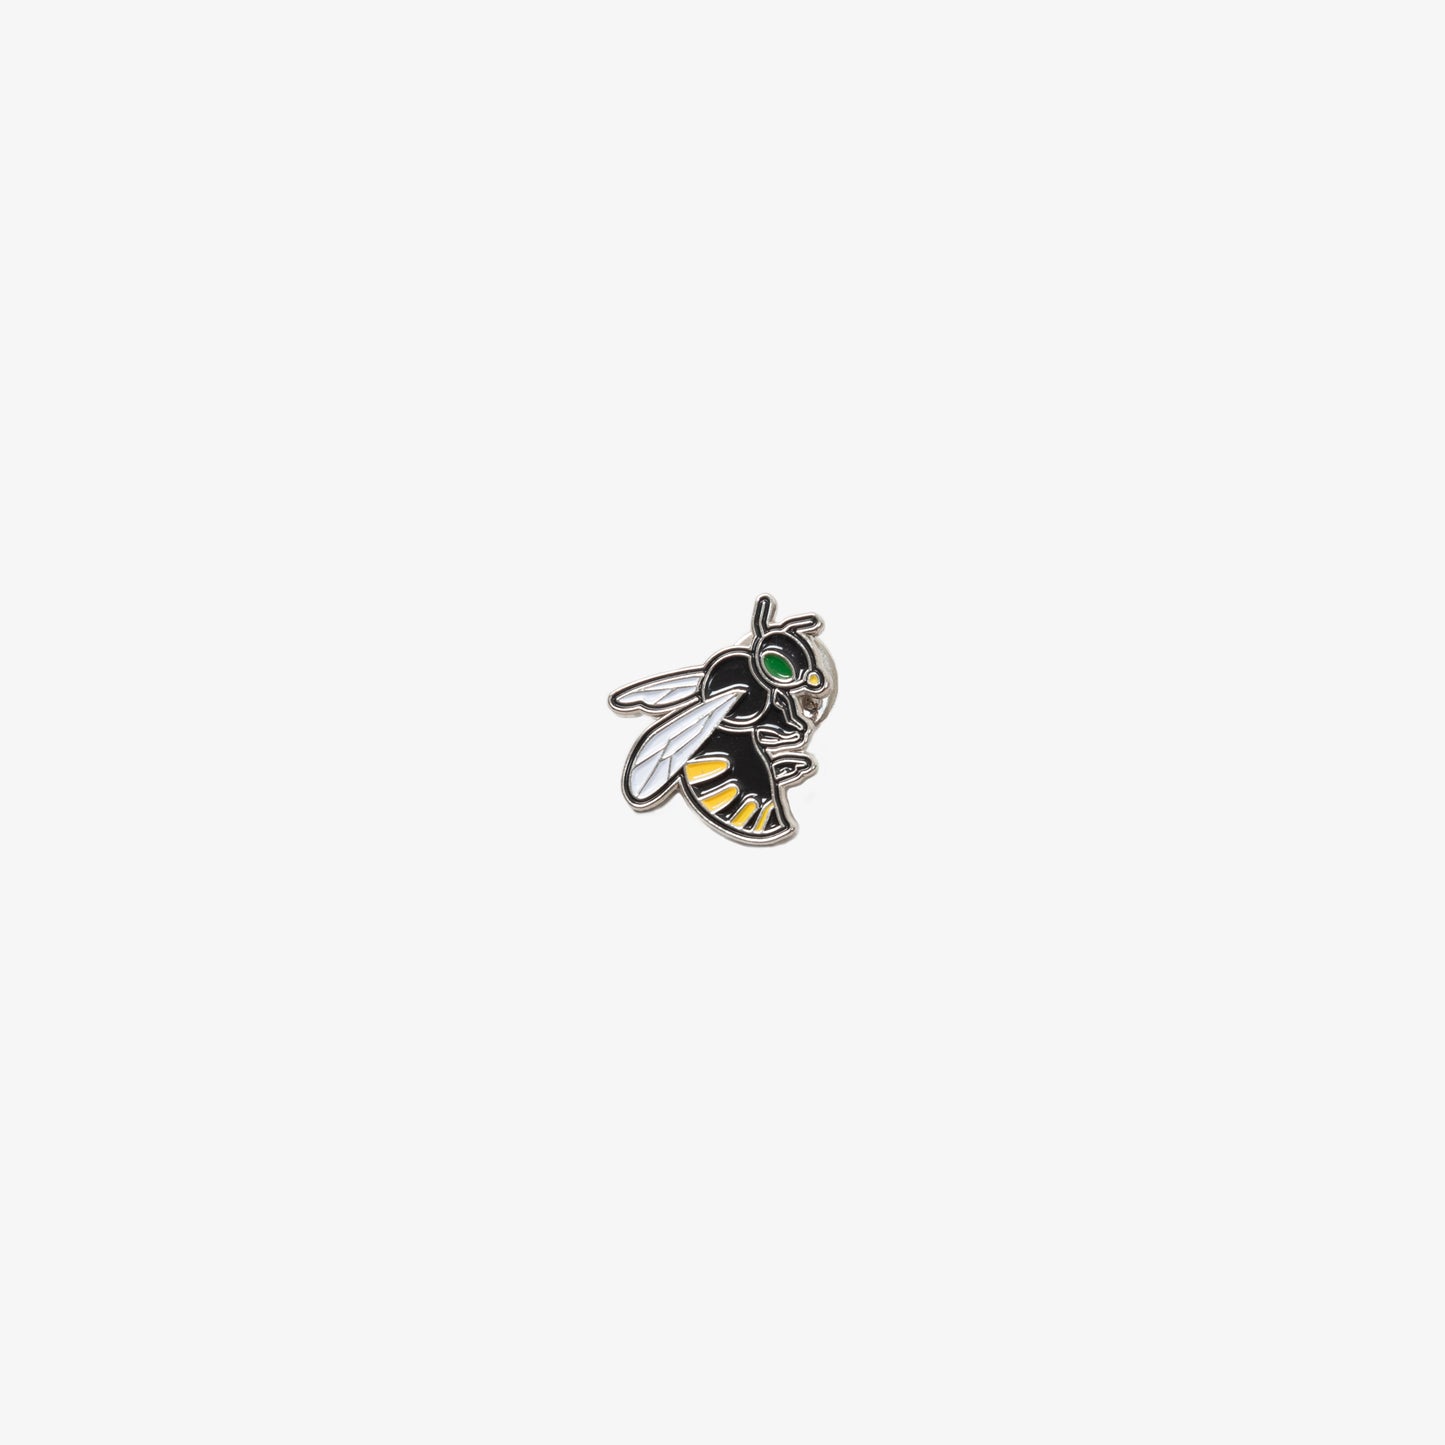 PLETHORA "Silver Bee" Pin